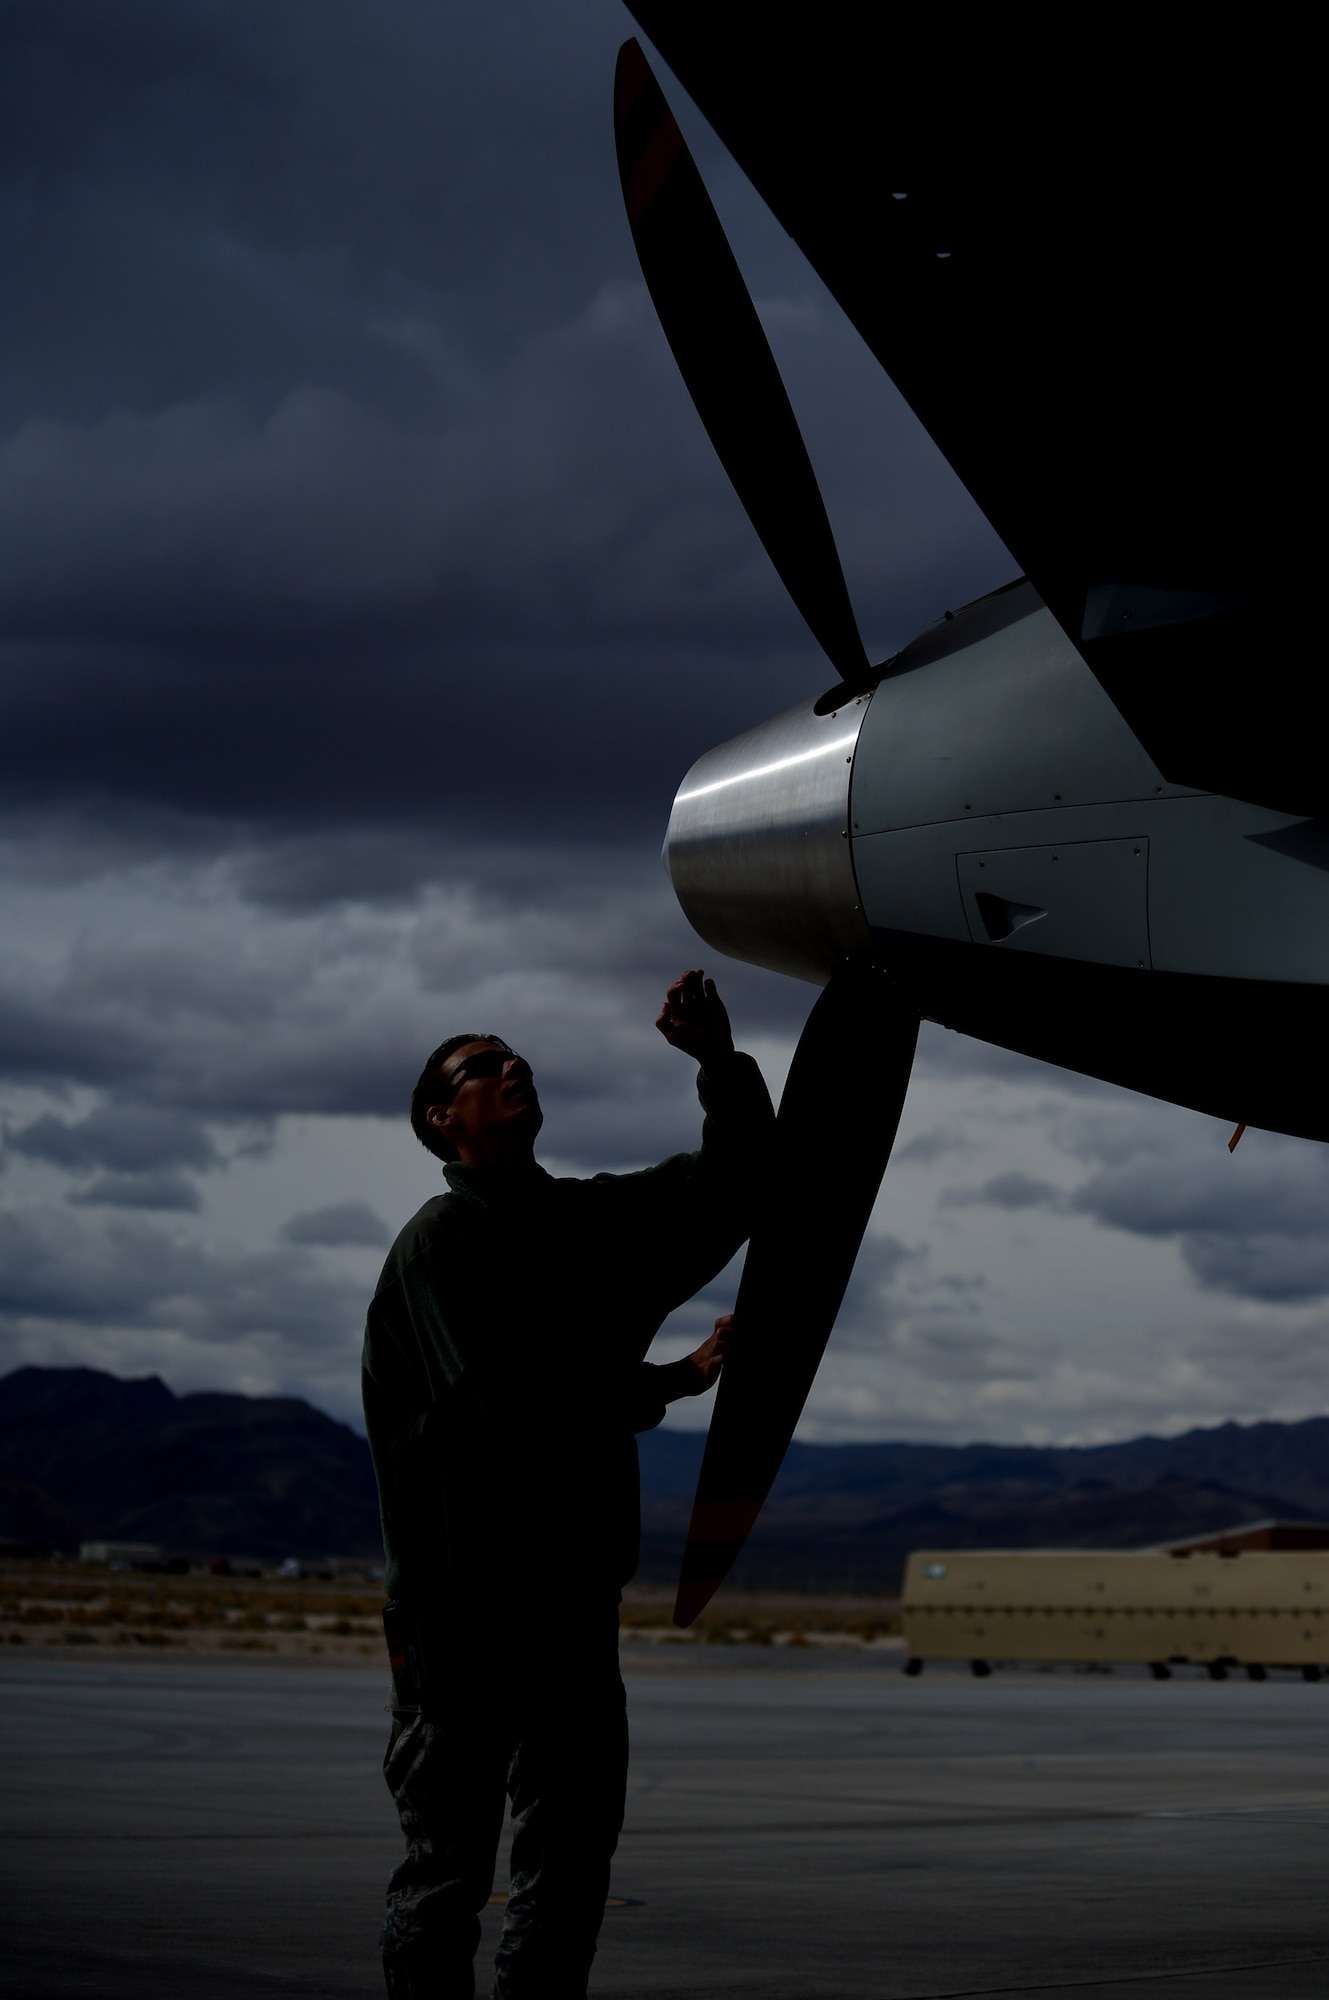 LAS VEGAS, Nev. -- A 432nd Aircraft Maintenance Squadron maintainer rotates the propeller of an MQ-9 Reaper remotely piloted aircraft during a post-flight inspection Oct. 28, 2013. The MQ-9 Reaper is an armed, multi-mission, medium-altitude, long-endurance RPA that is employed primarily as an intelligence-collection asset and secondarily against dynamic execution targets. The USAF’s MQ-9 Reaper and MQ-1 Predator fleet surpassed 2 million cumulative flight hours on Oct. 22, 2013. (U.S. Air Force photo by Staff Sgt. N.B./released)